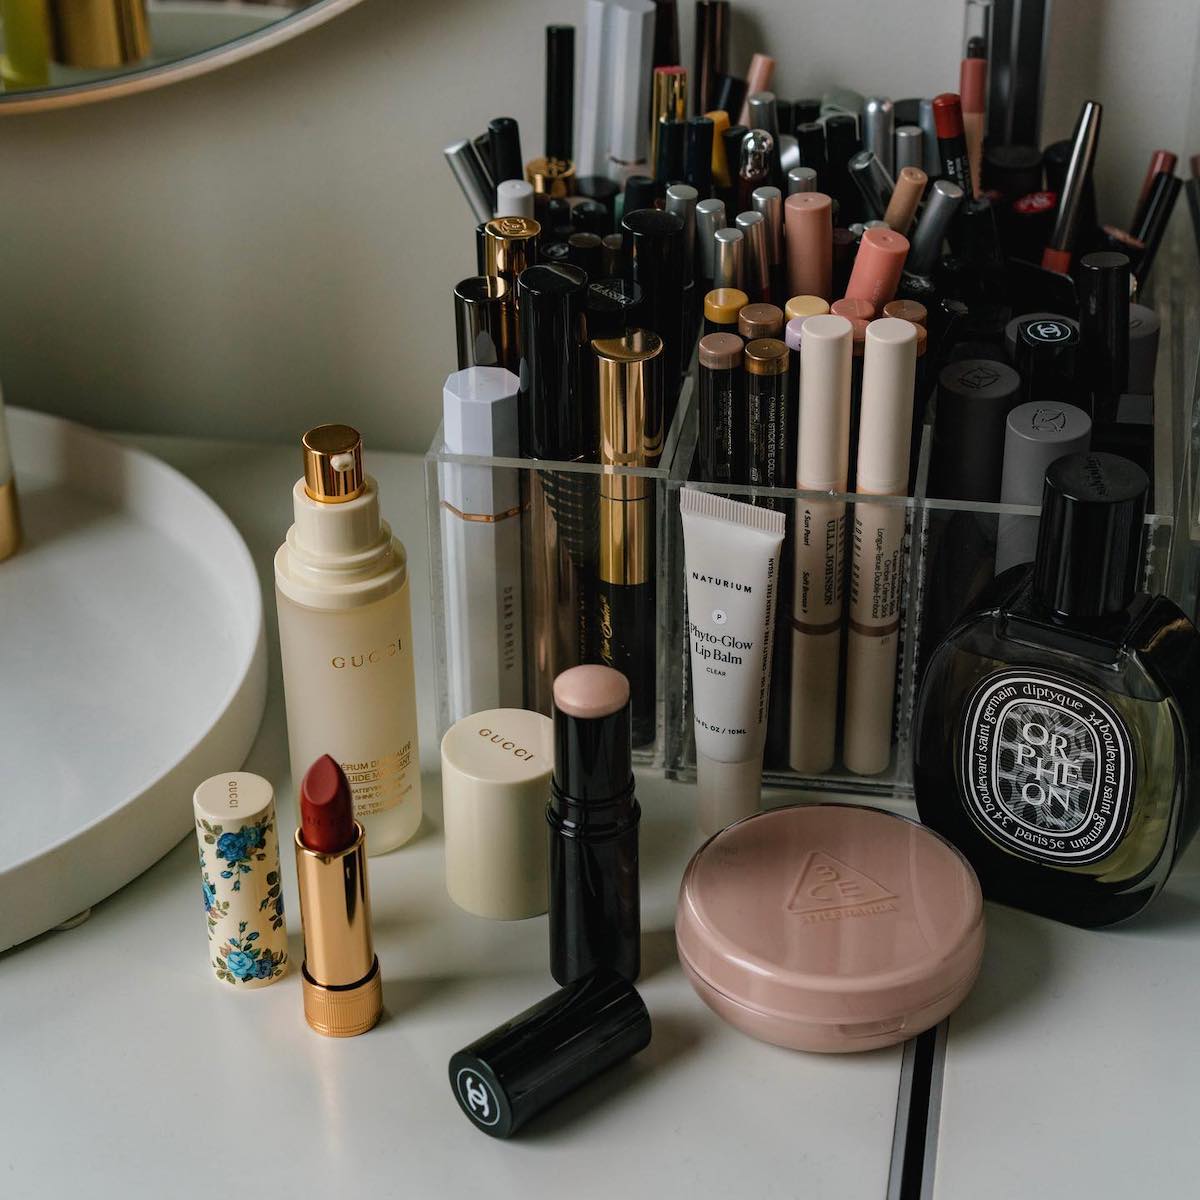 Beauty products on vanity